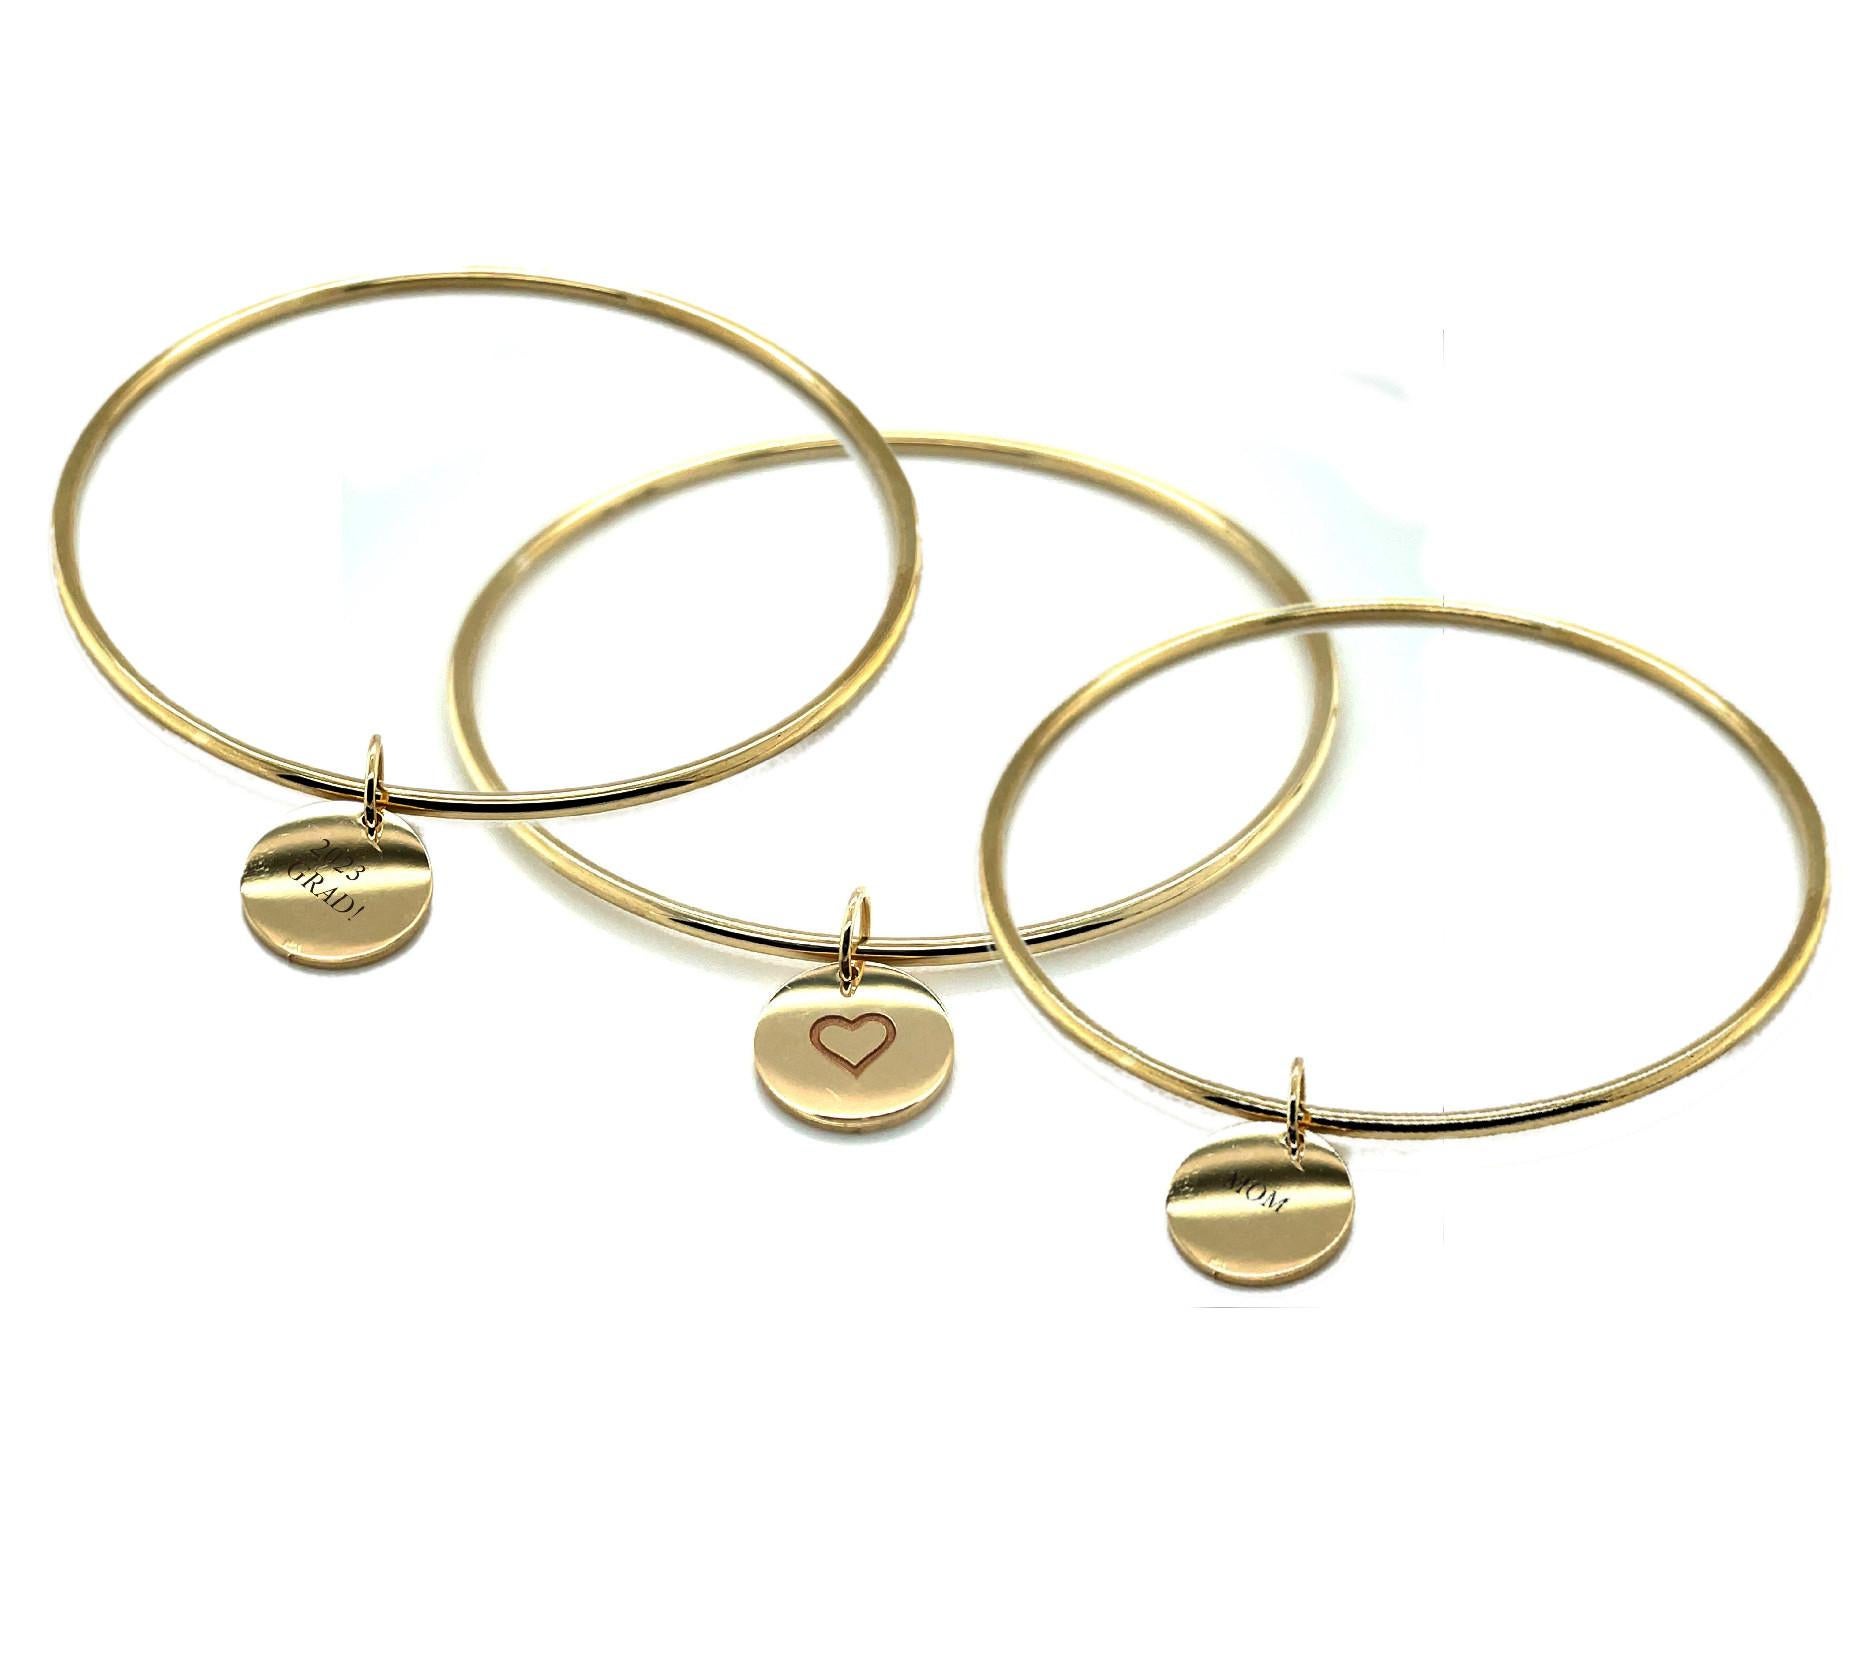 Artisan Round Bangle Bracelet with Engravable Charm in 14k Yellow Gold For Sale